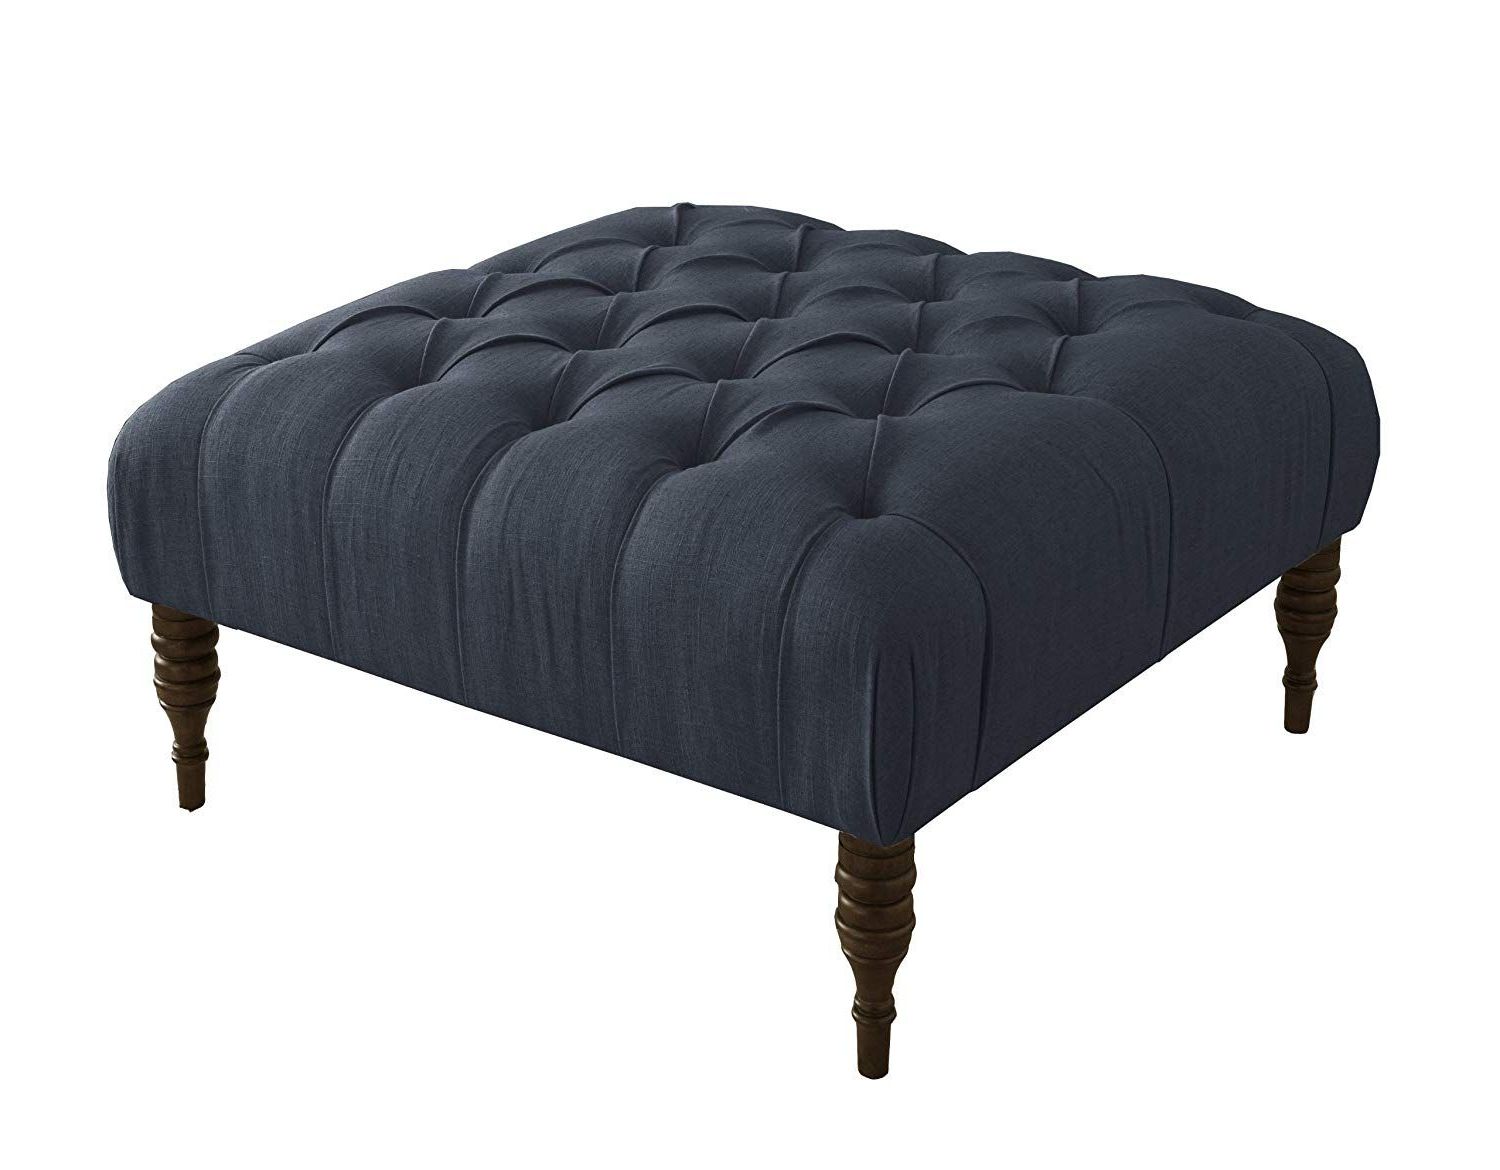 French Linen Black Square Ottomans Throughout Widely Used Skyline Furniture Tufted Cocktail Ottoman In Linen Navy (View 2 of 10)